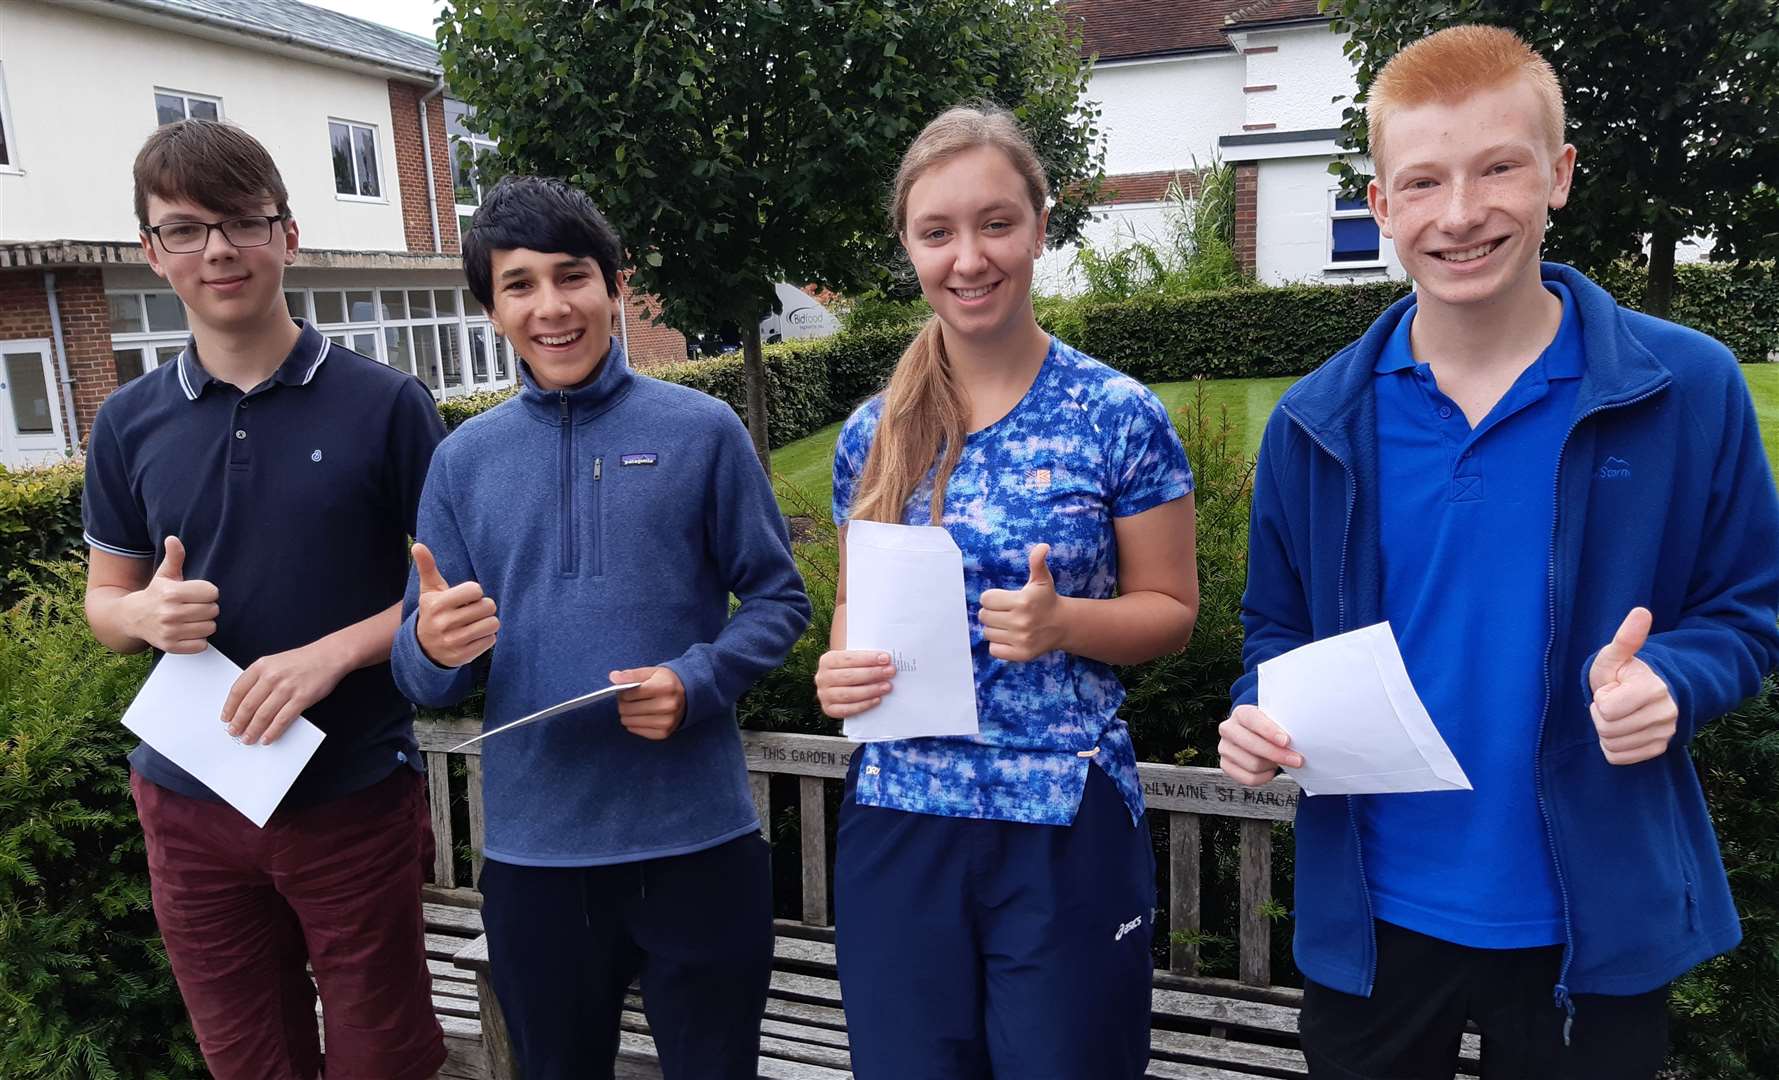 Toby Loy, David Wild, Scarlett Washington and James Gardiner are all happy with their results at Sutton Valence School